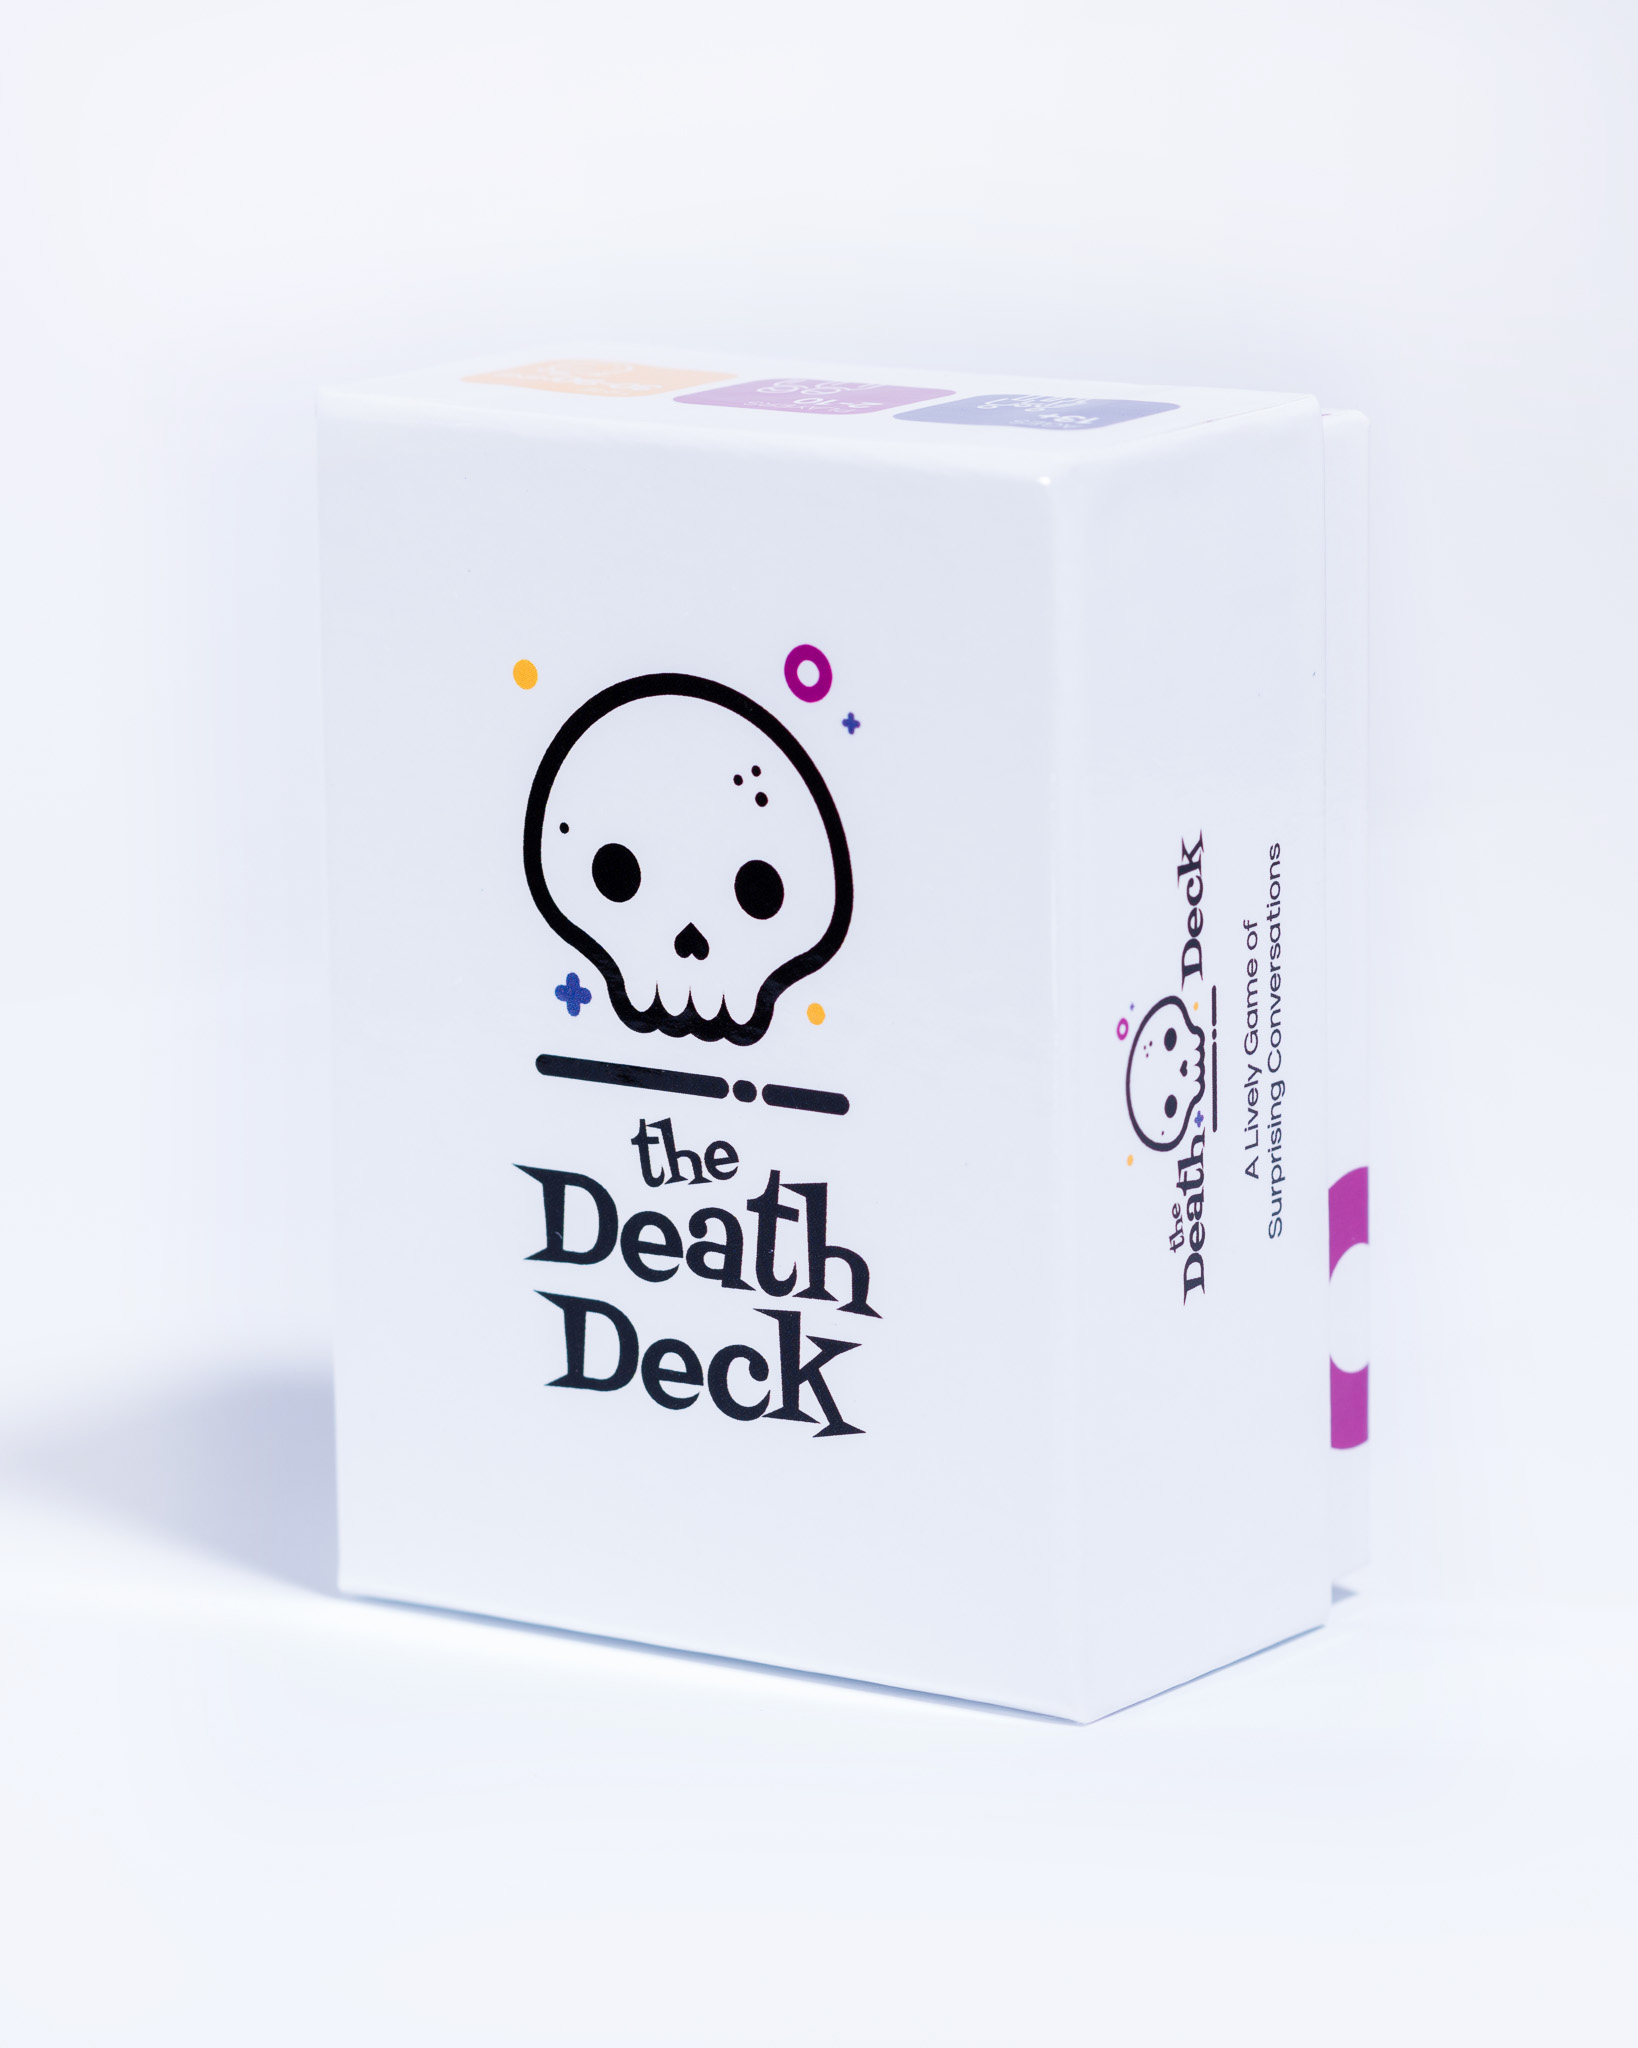 The Death Deck